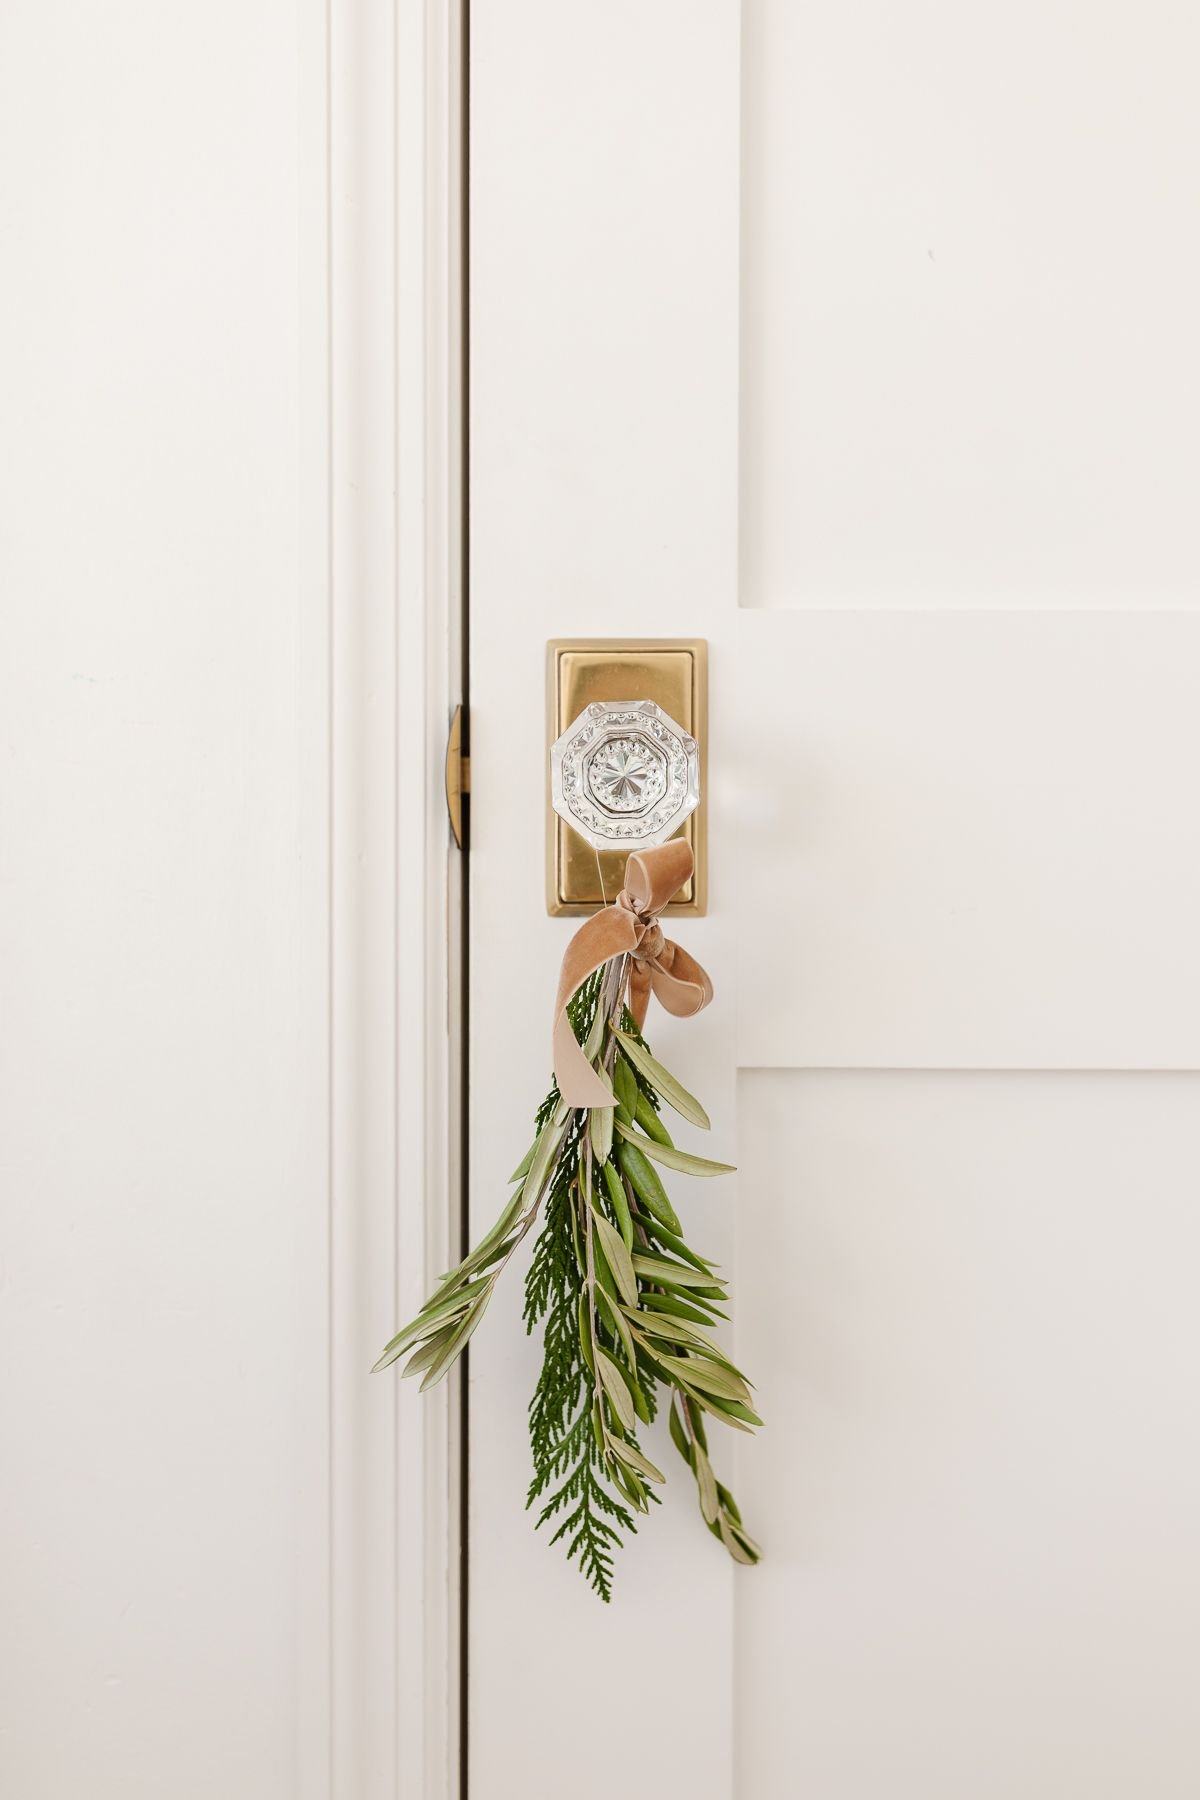 Fresh Christmas greenery tied with a bow on a glass doorknob.